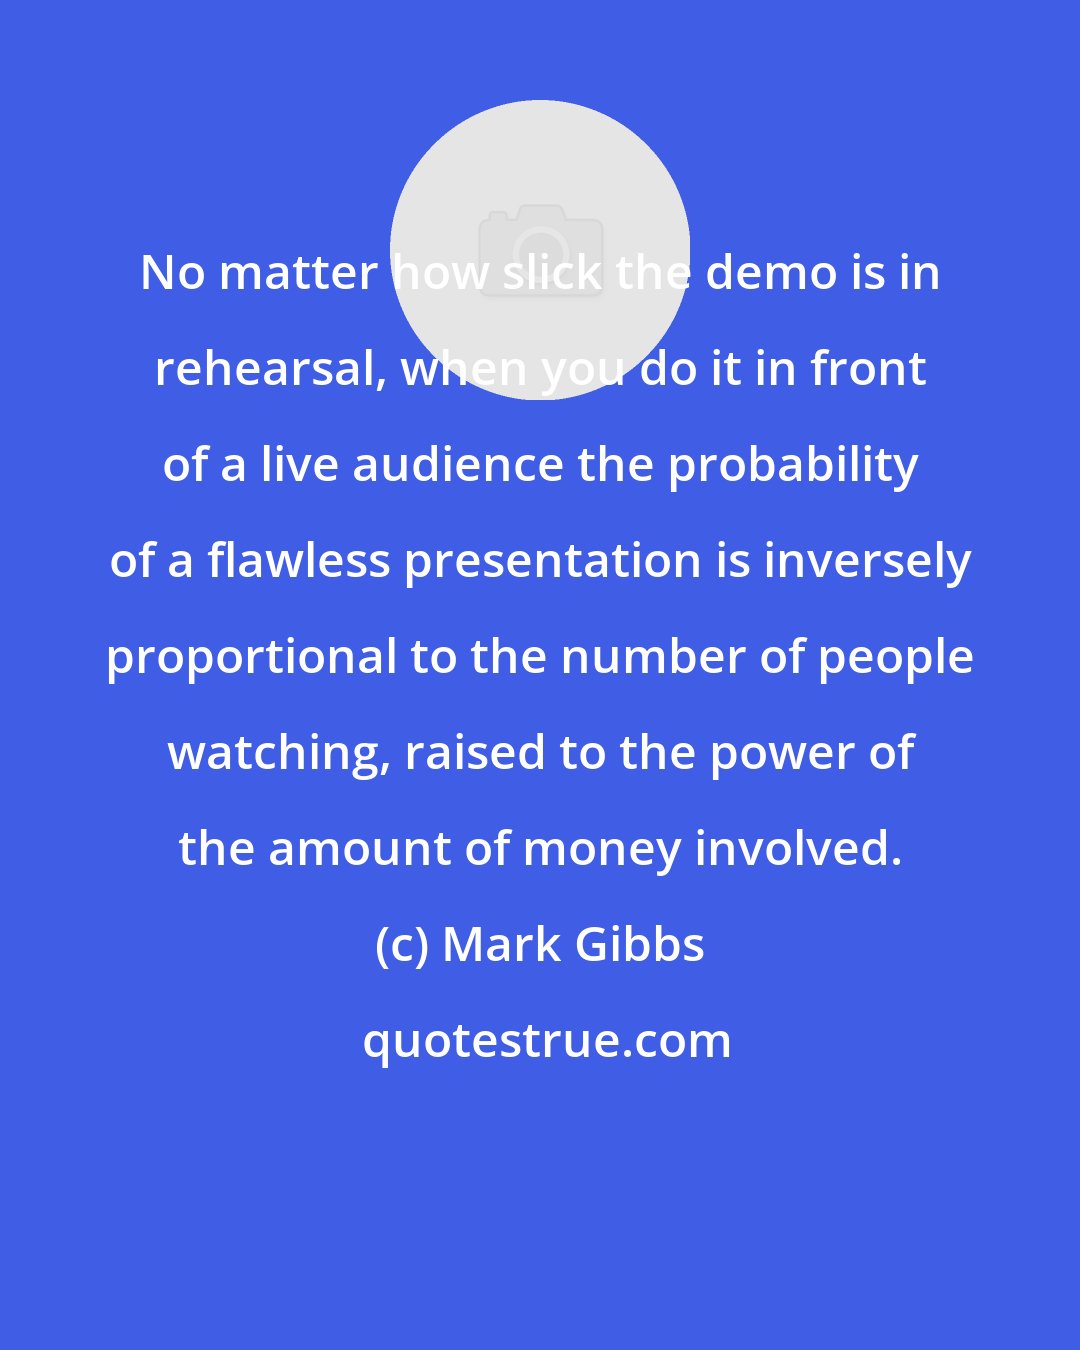 Mark Gibbs: No matter how slick the demo is in rehearsal, when you do it in front of a live audience the probability of a flawless presentation is inversely proportional to the number of people watching, raised to the power of the amount of money involved.